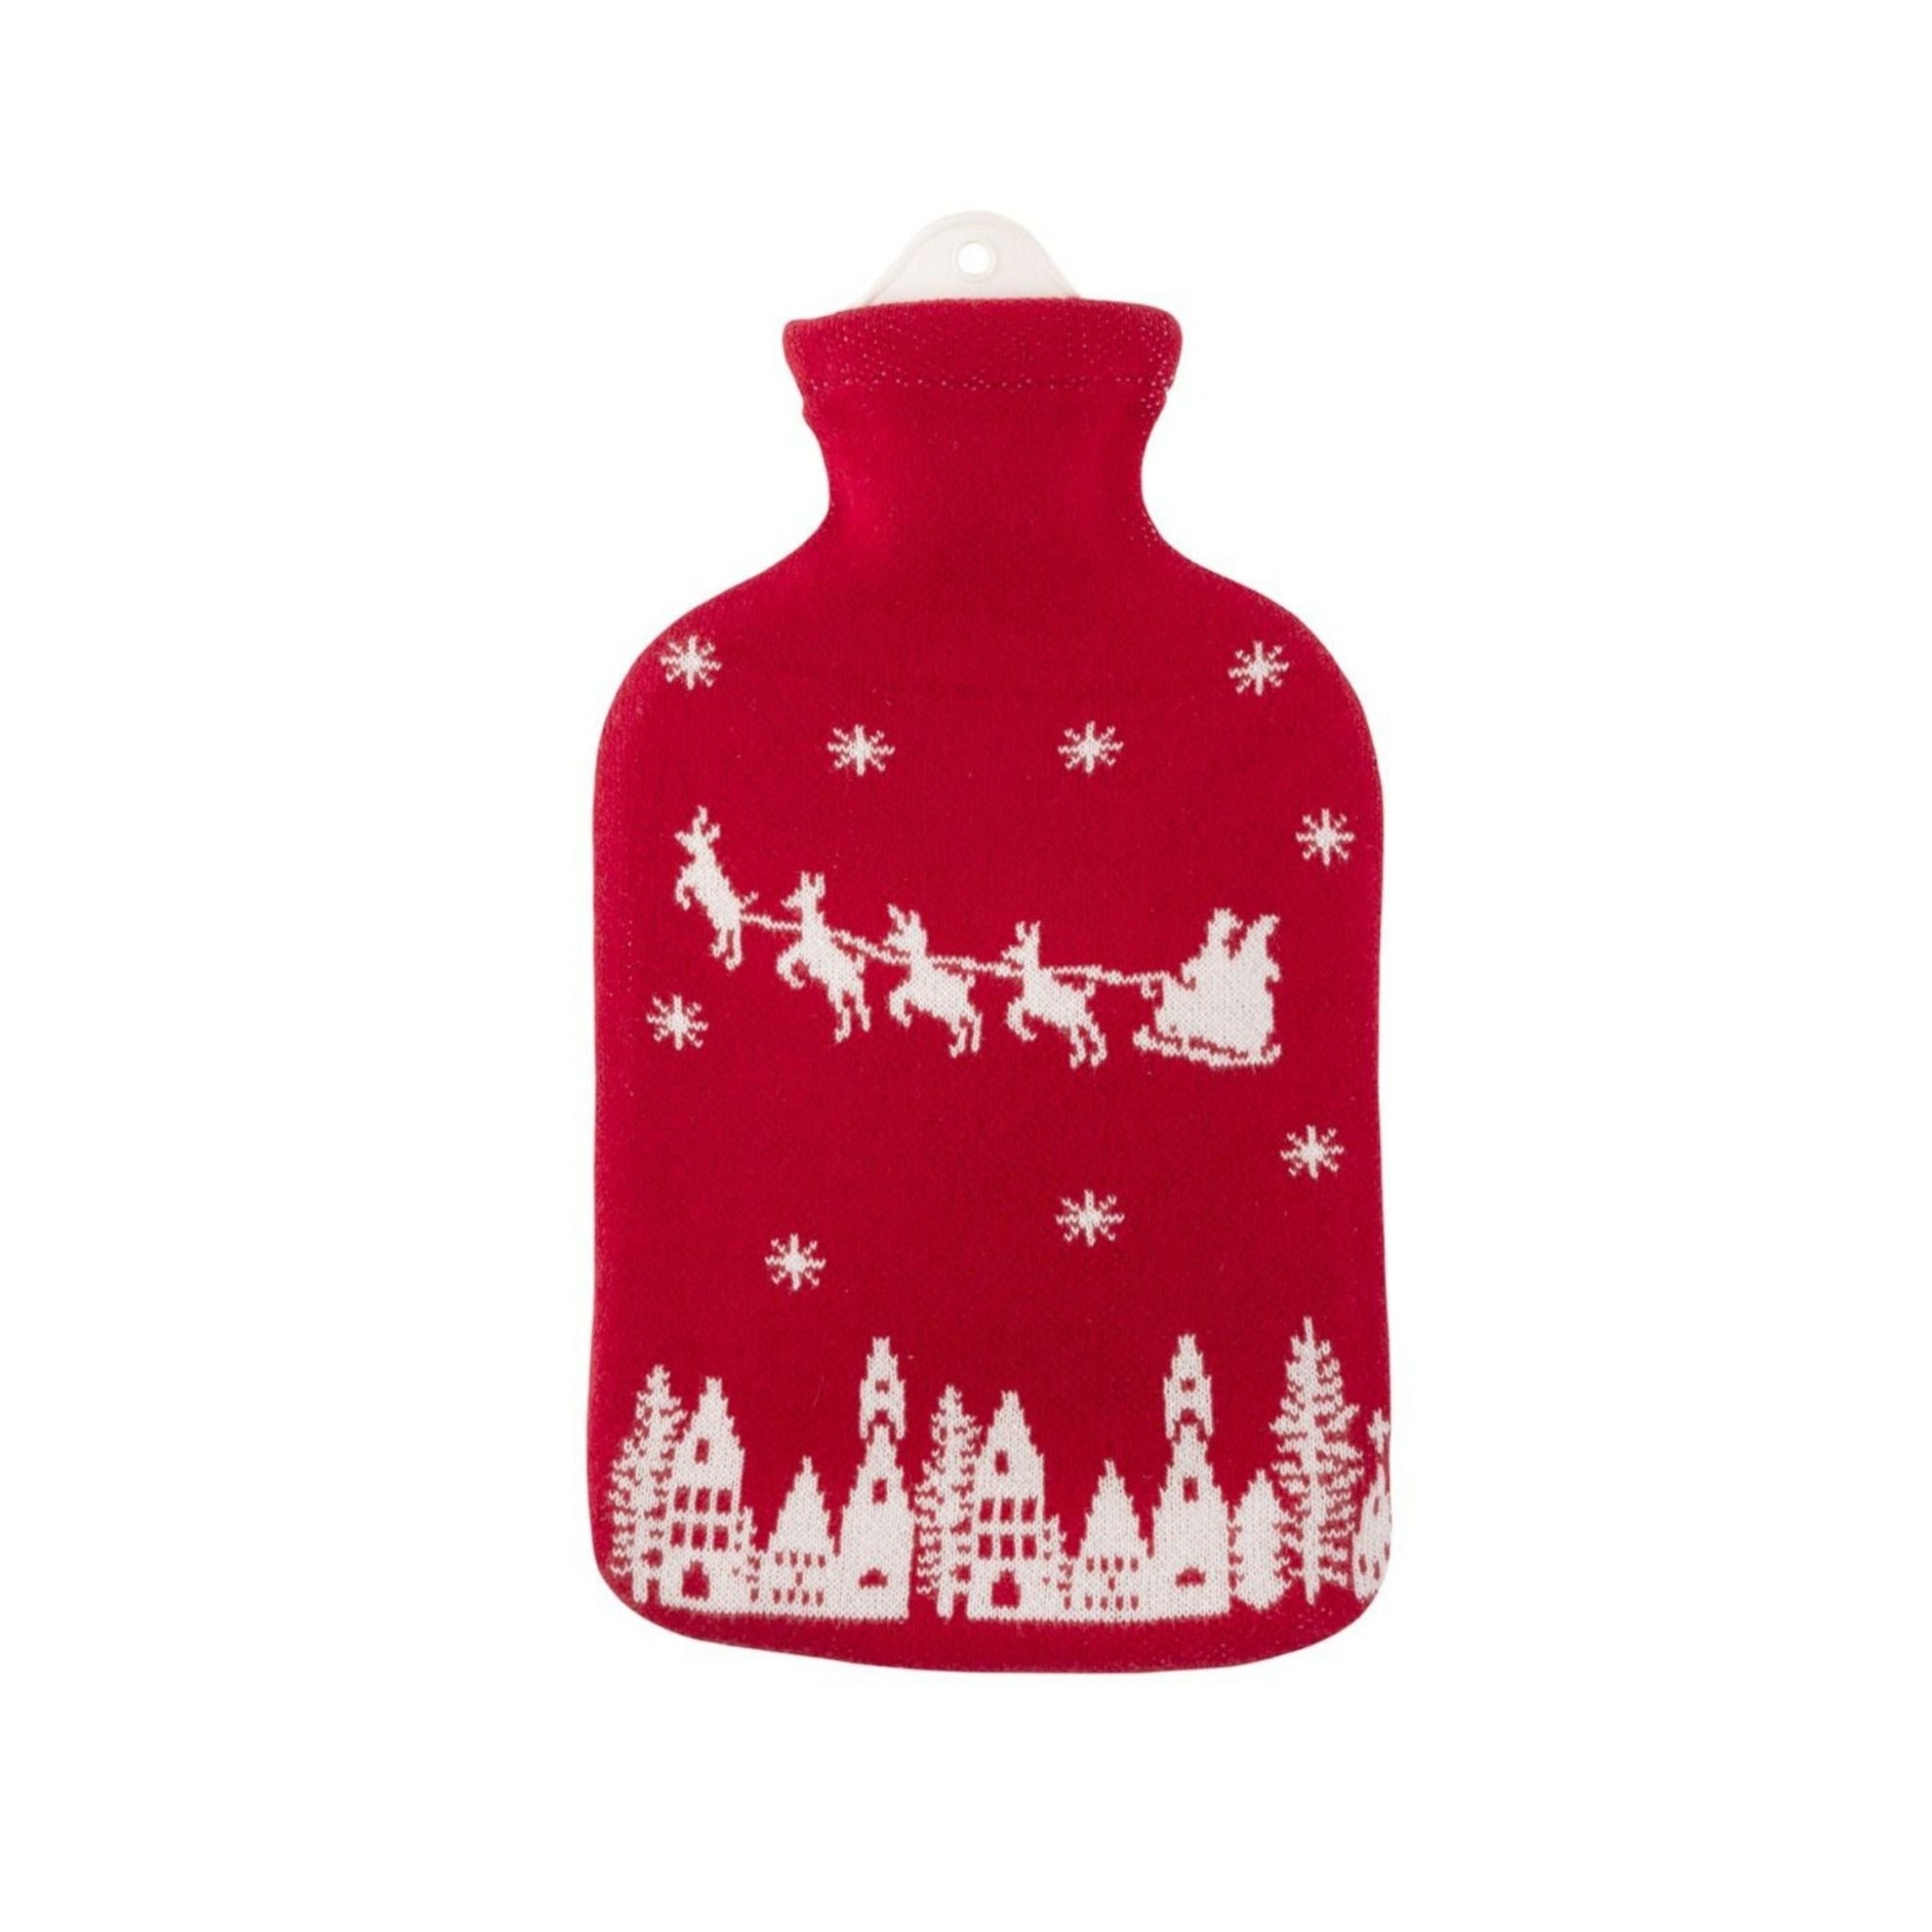 2 Litre Sanger Hot Water Bottle with Santa Claus Cover - Front